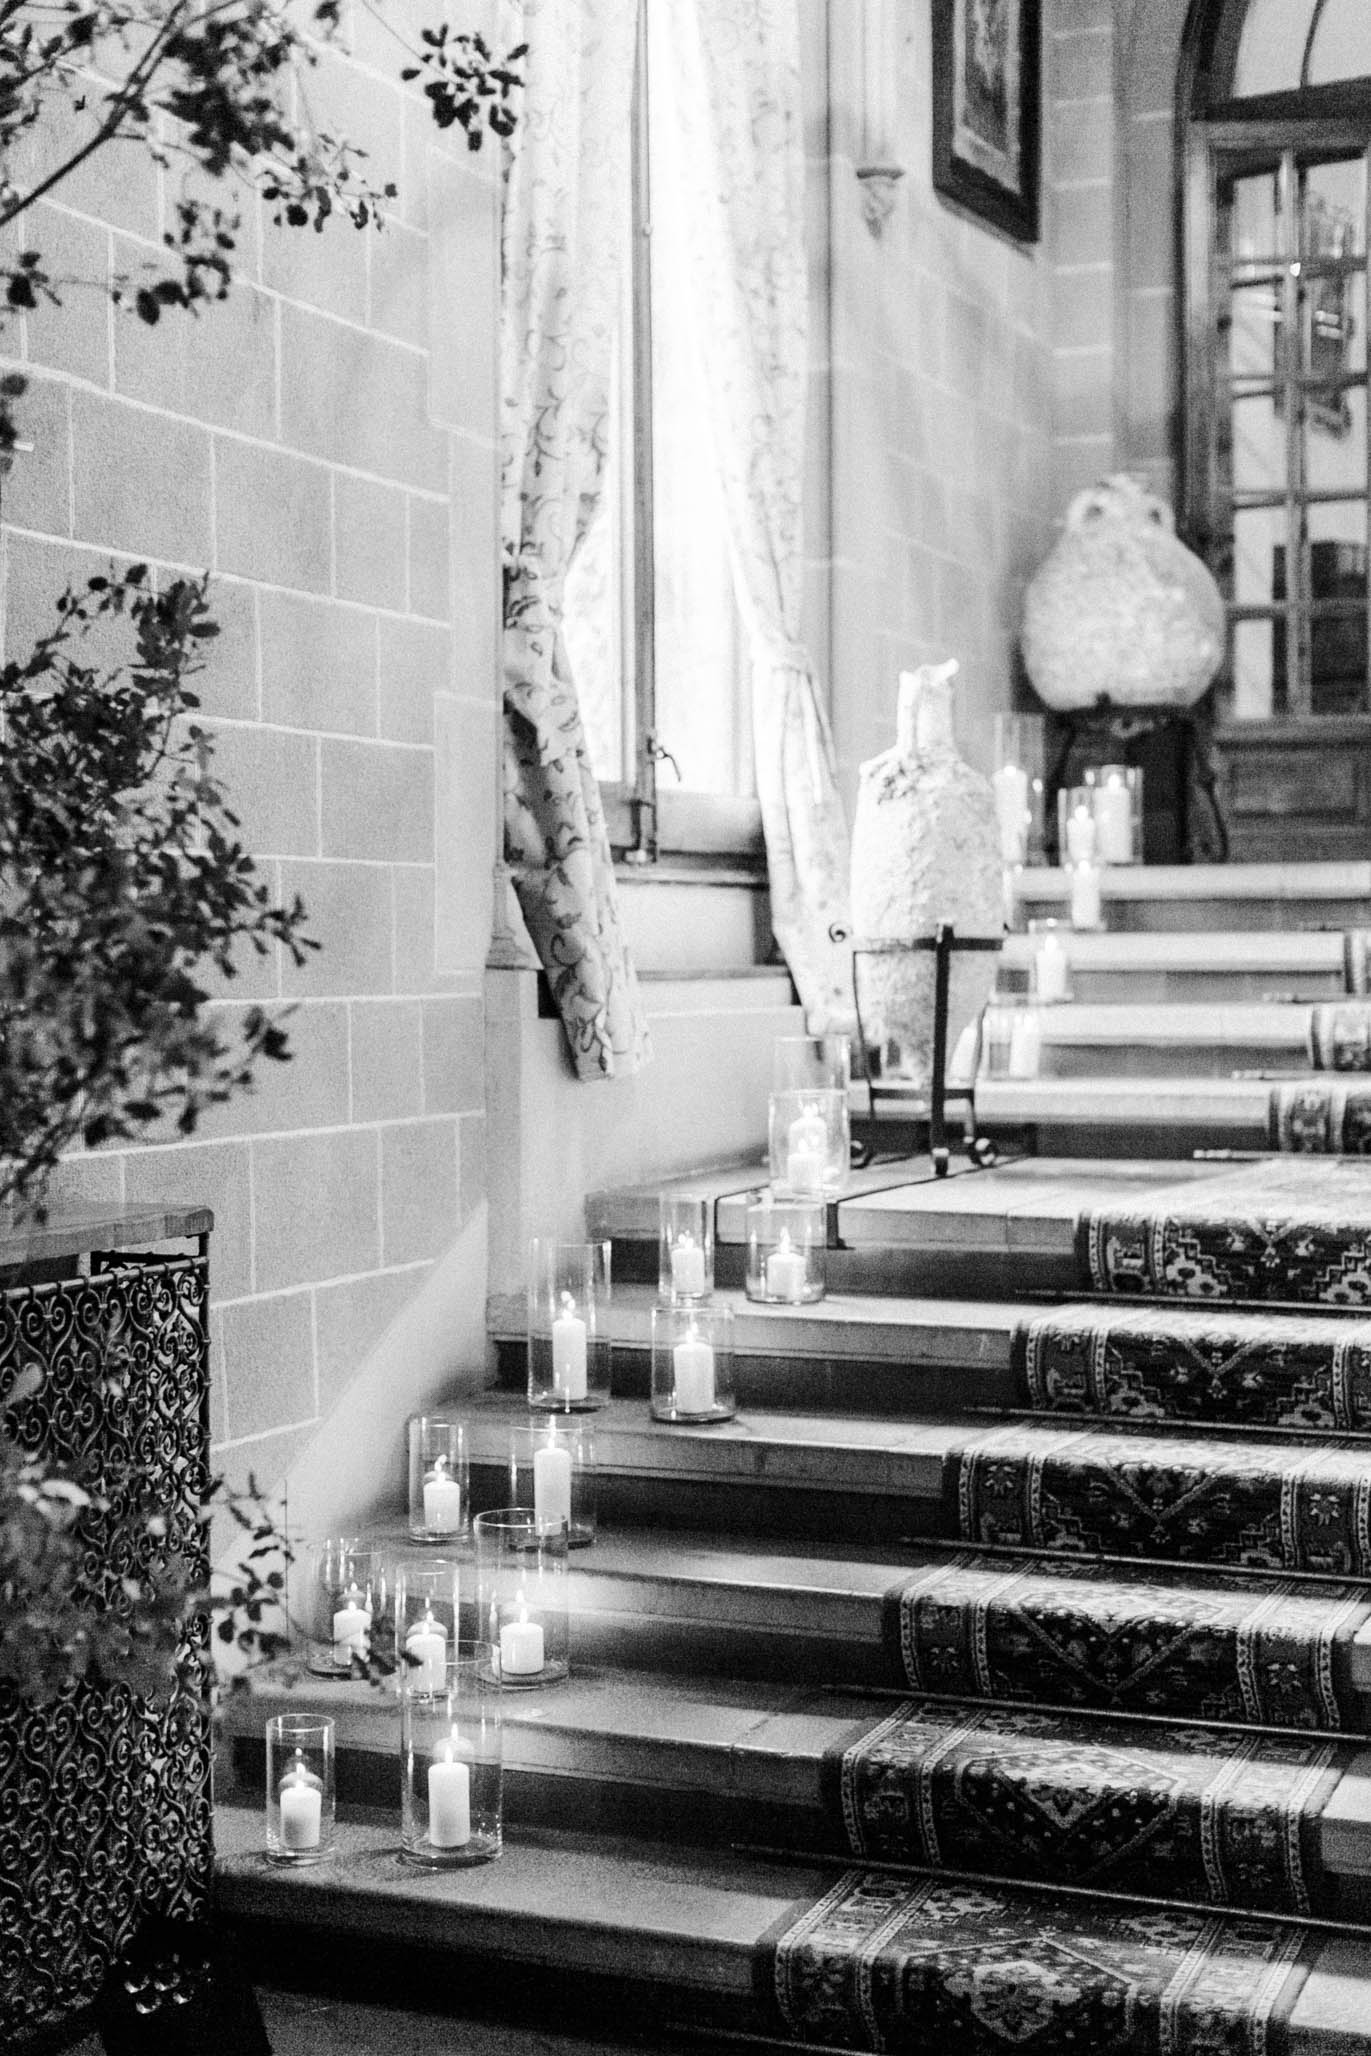 These were the entrance steps to the reception. Doesn’t it look like it’s straight out of a movie. The details are so genuine, so perfect, so romantic. I could really go on.